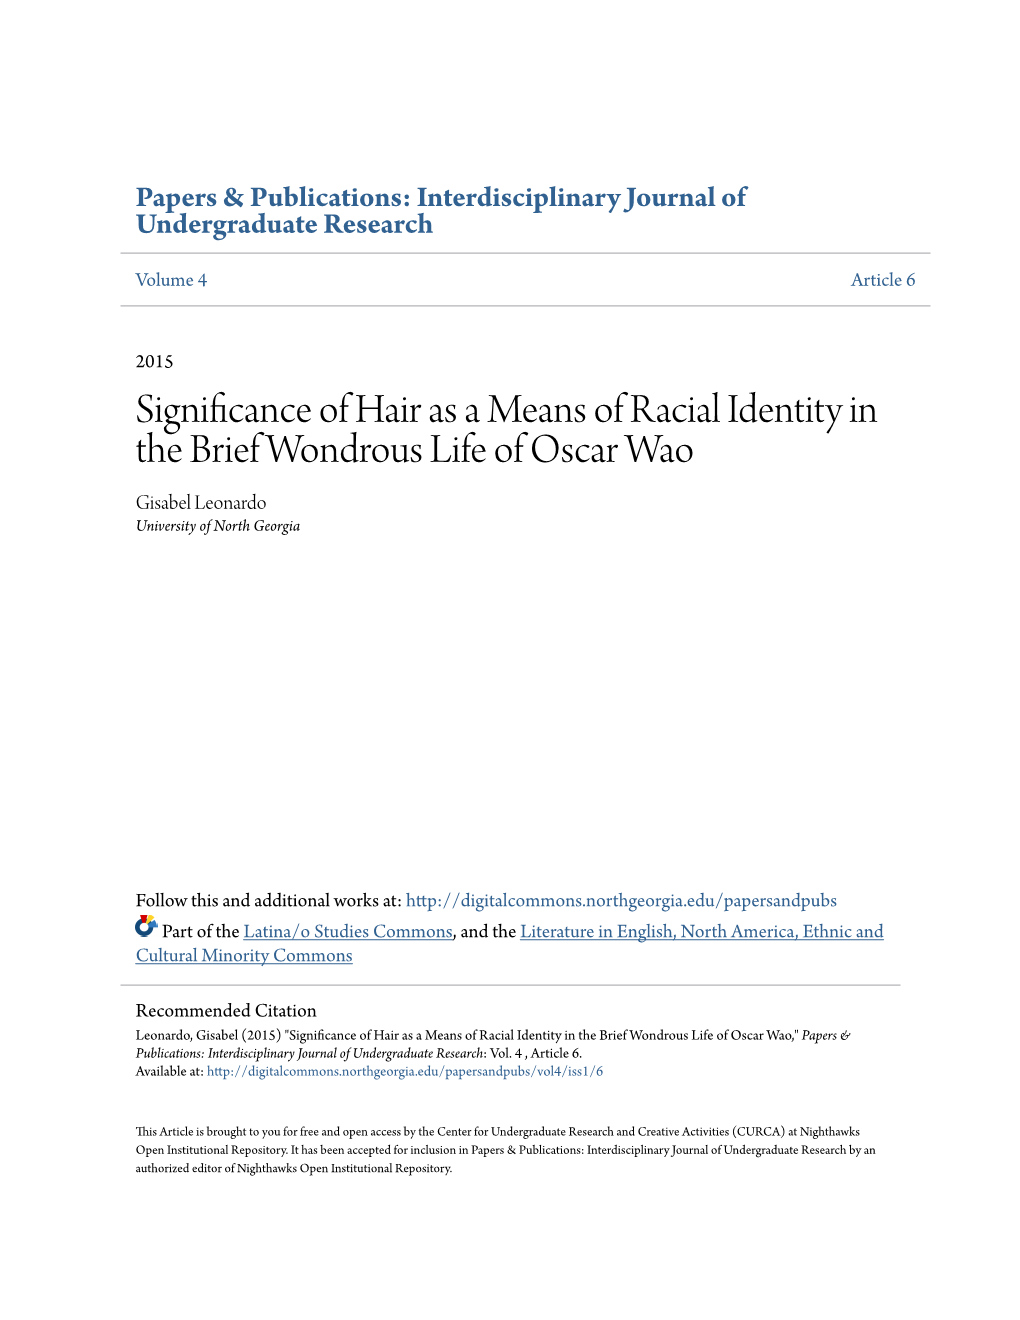 Significance of Hair As a Means of Racial Identity in the Brief Wondrous Life of Oscar Wao Gisabel Leonardo University of North Georgia